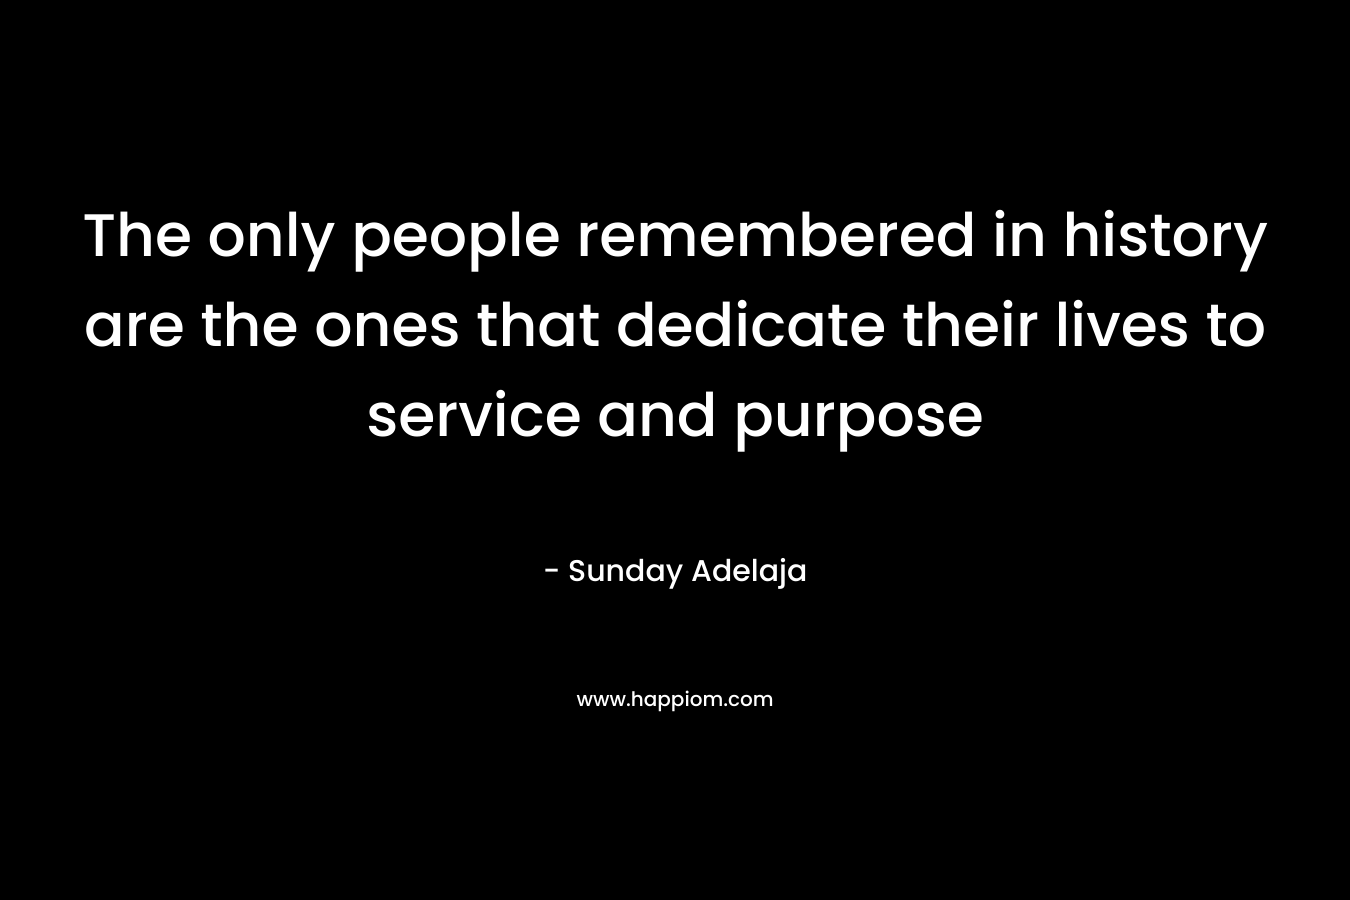 The only people remembered in history are the ones that dedicate their lives to service and purpose – Sunday Adelaja